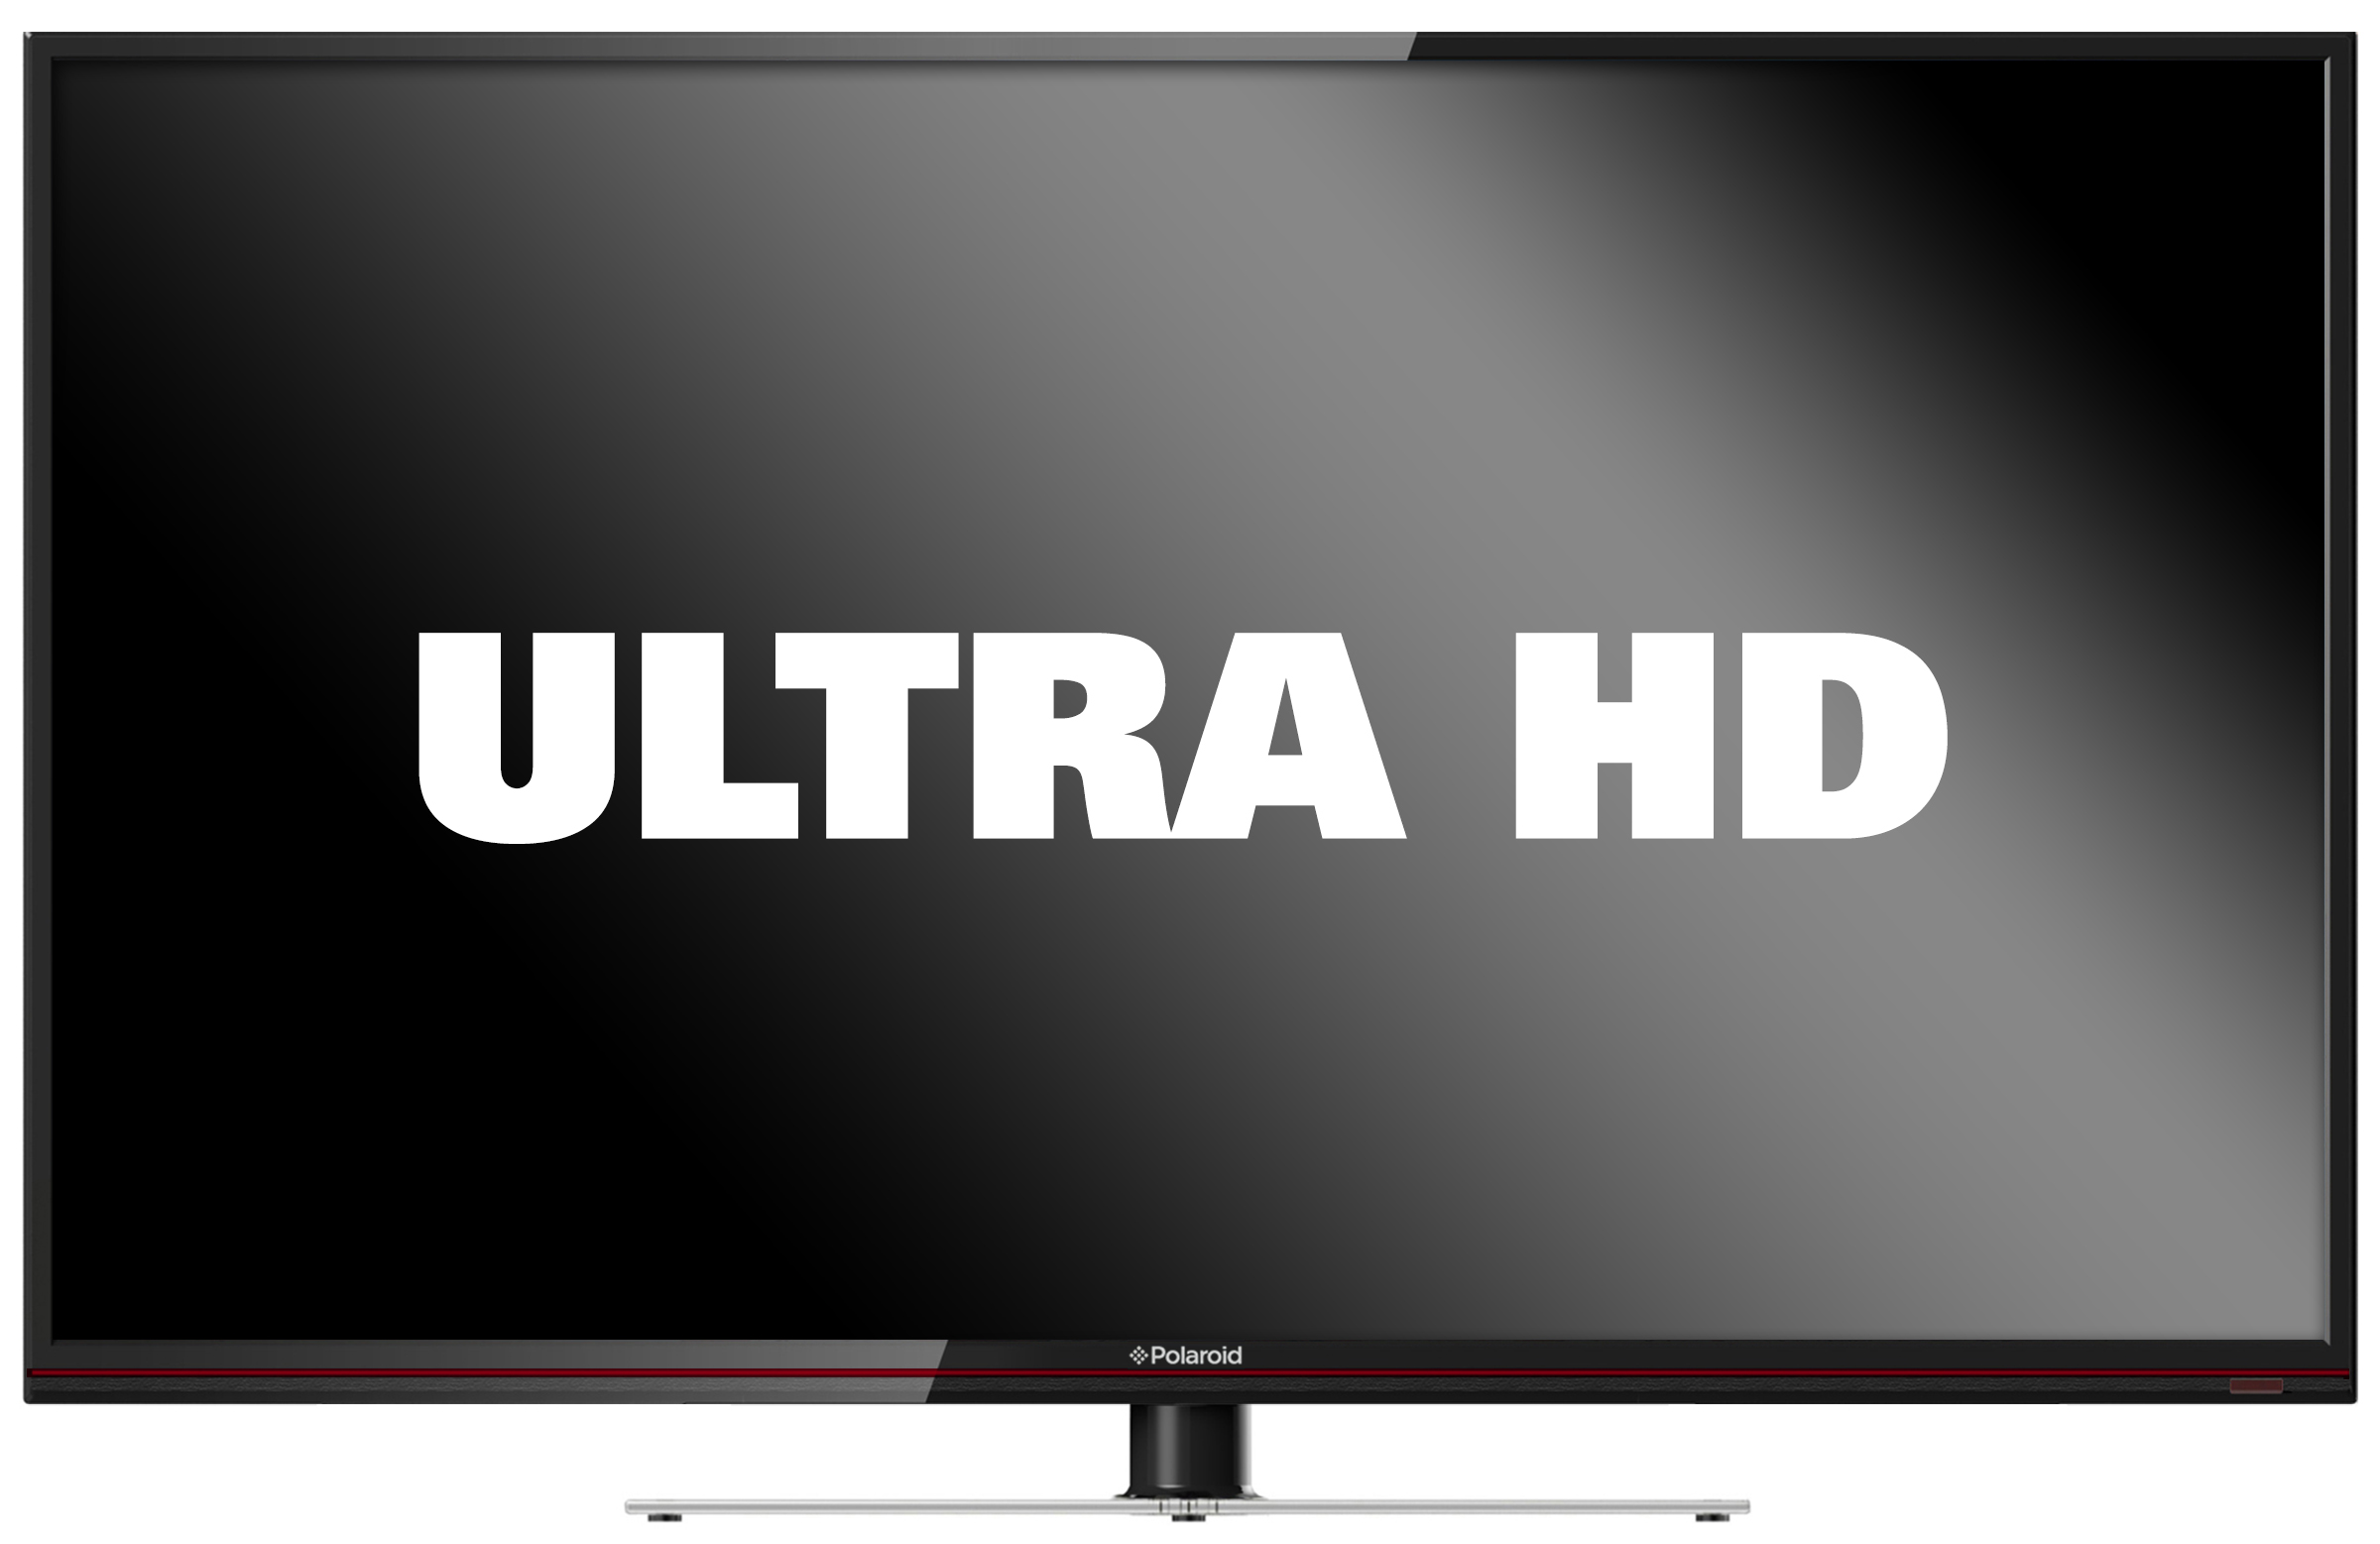 Polaroid(r) Now Shipping First 4K Ultra HD LED TV Models